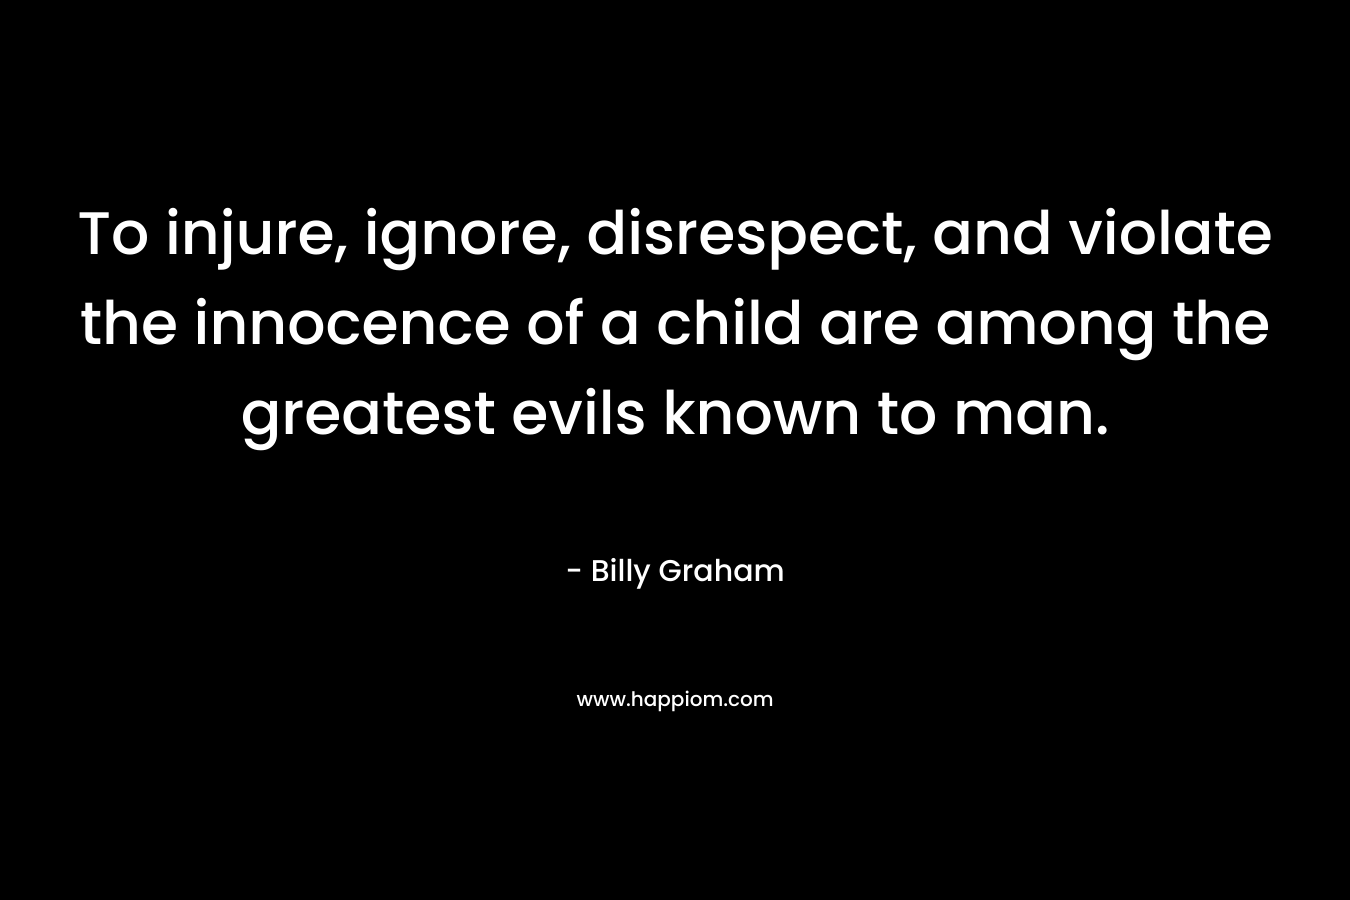 To injure, ignore, disrespect, and violate the innocence of a child are among the greatest evils known to man. – Billy Graham